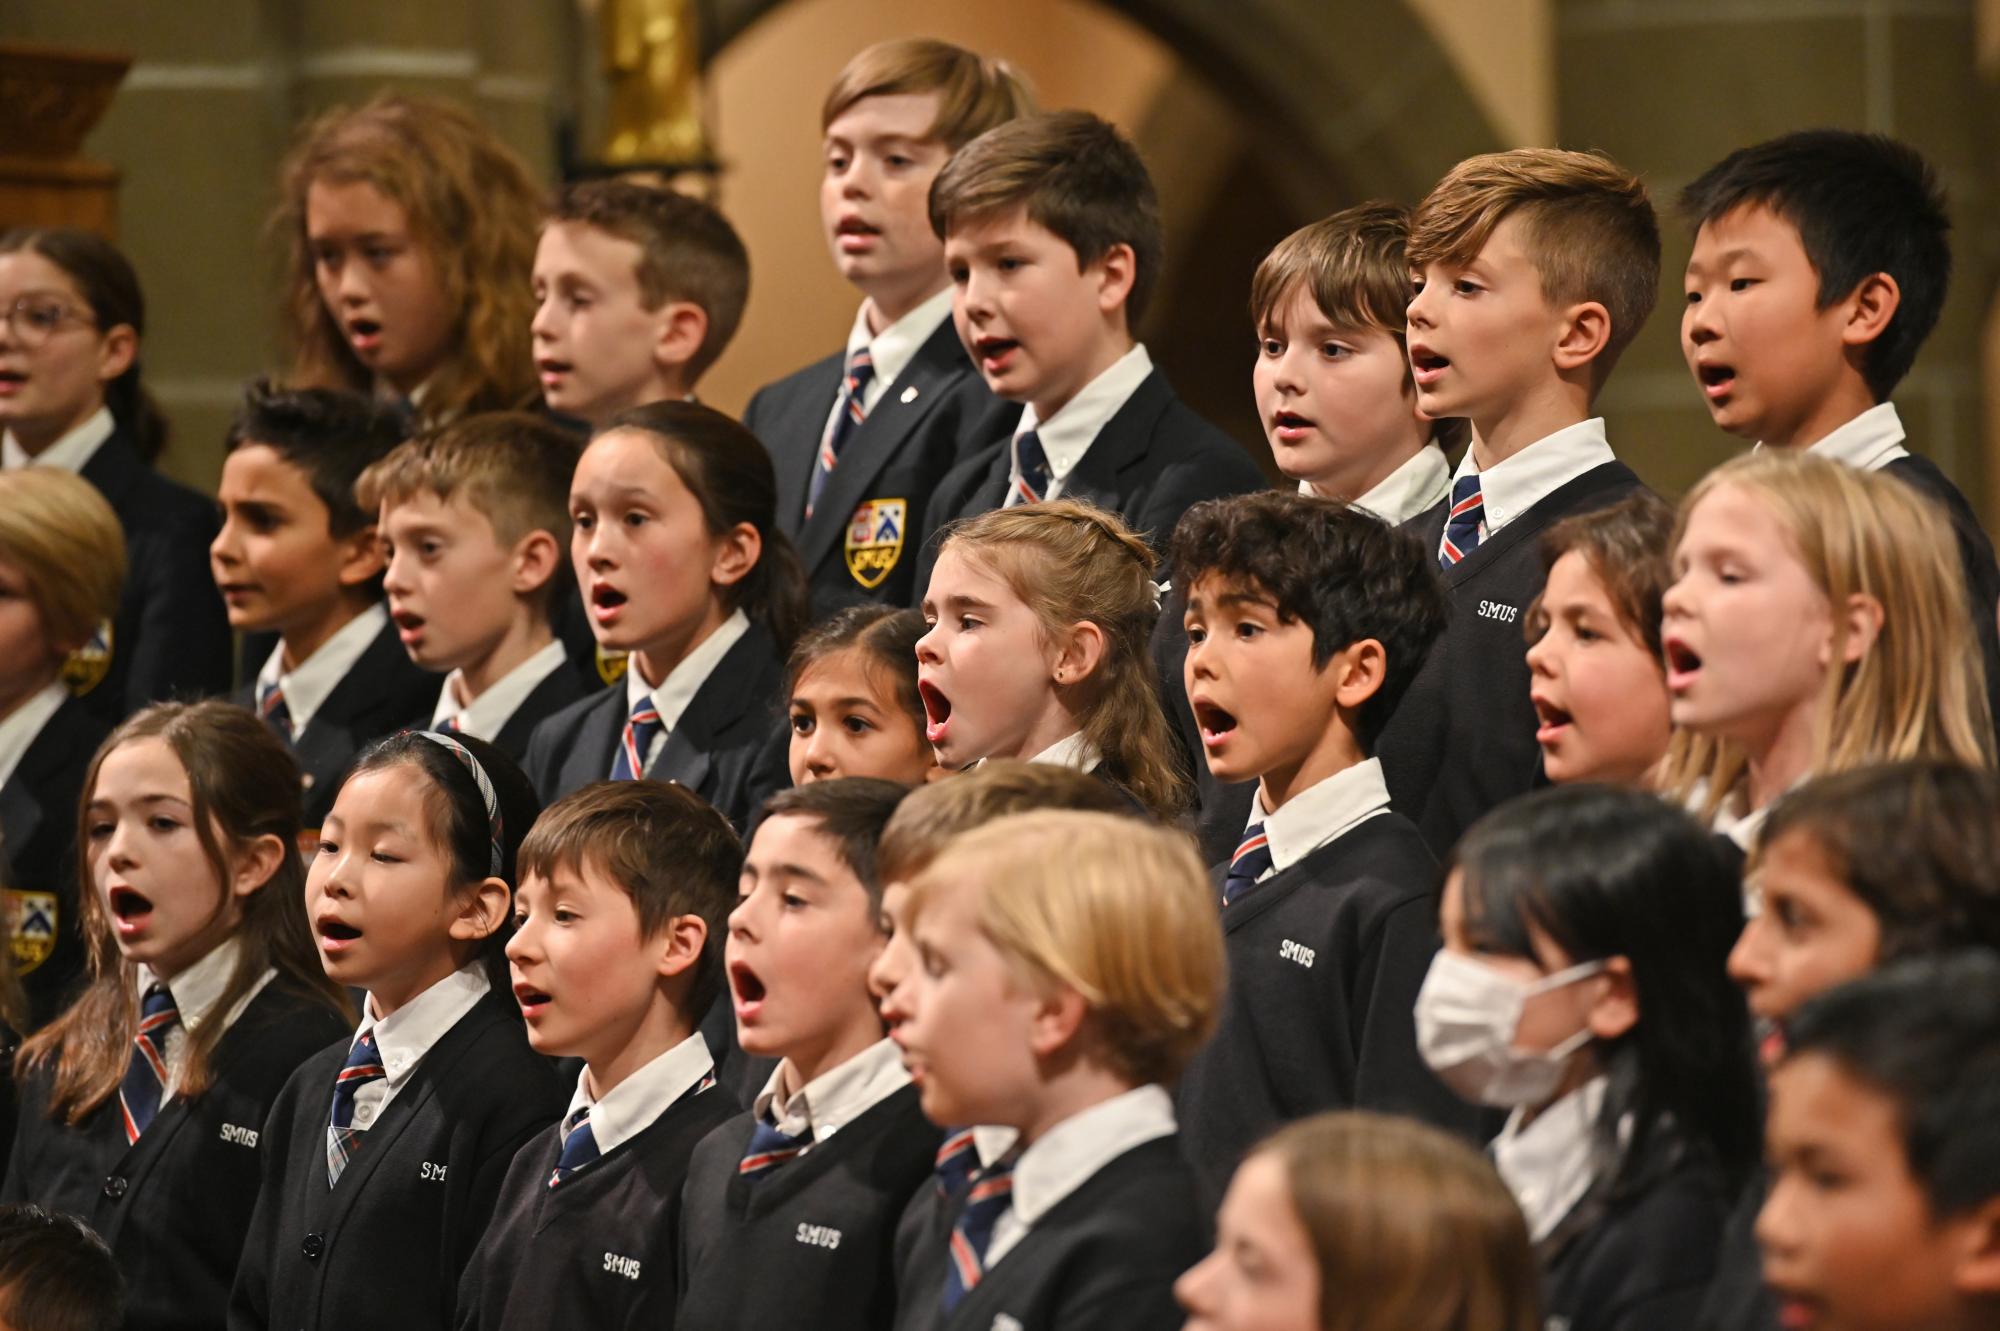 Junior School singers perform a choral song during the Carol Service